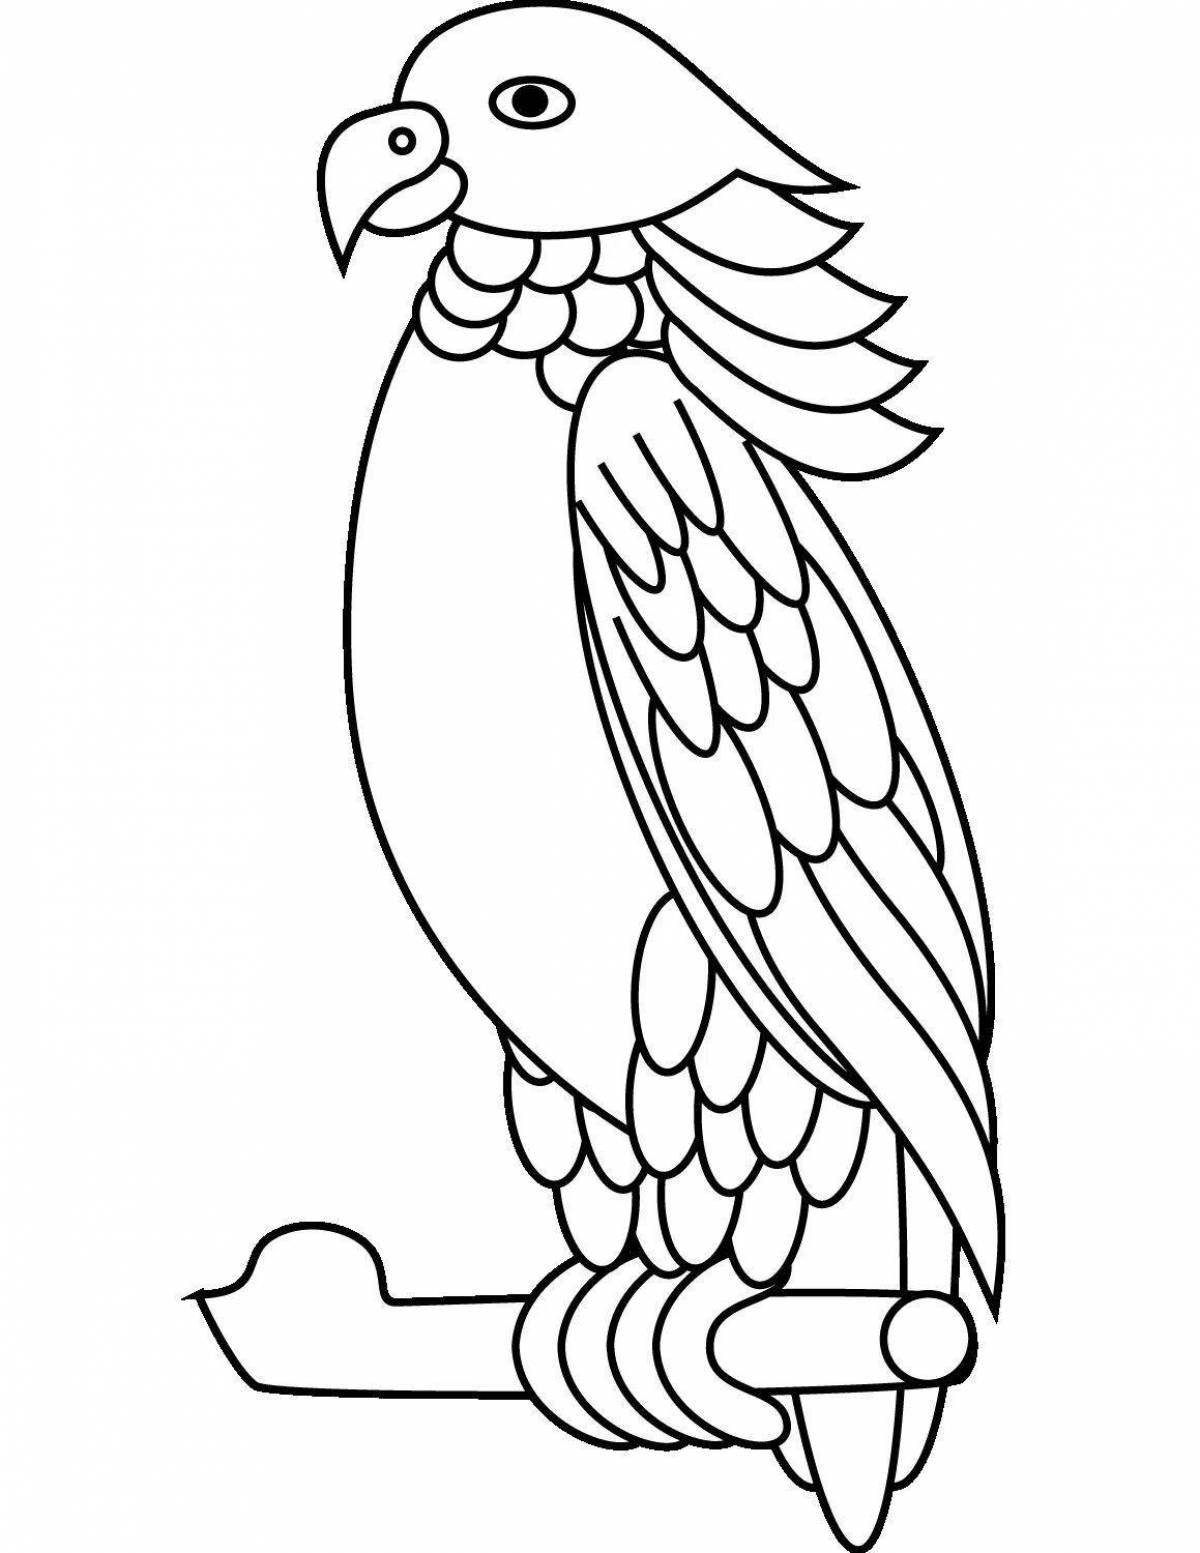 Coloring book for kids nice parrot